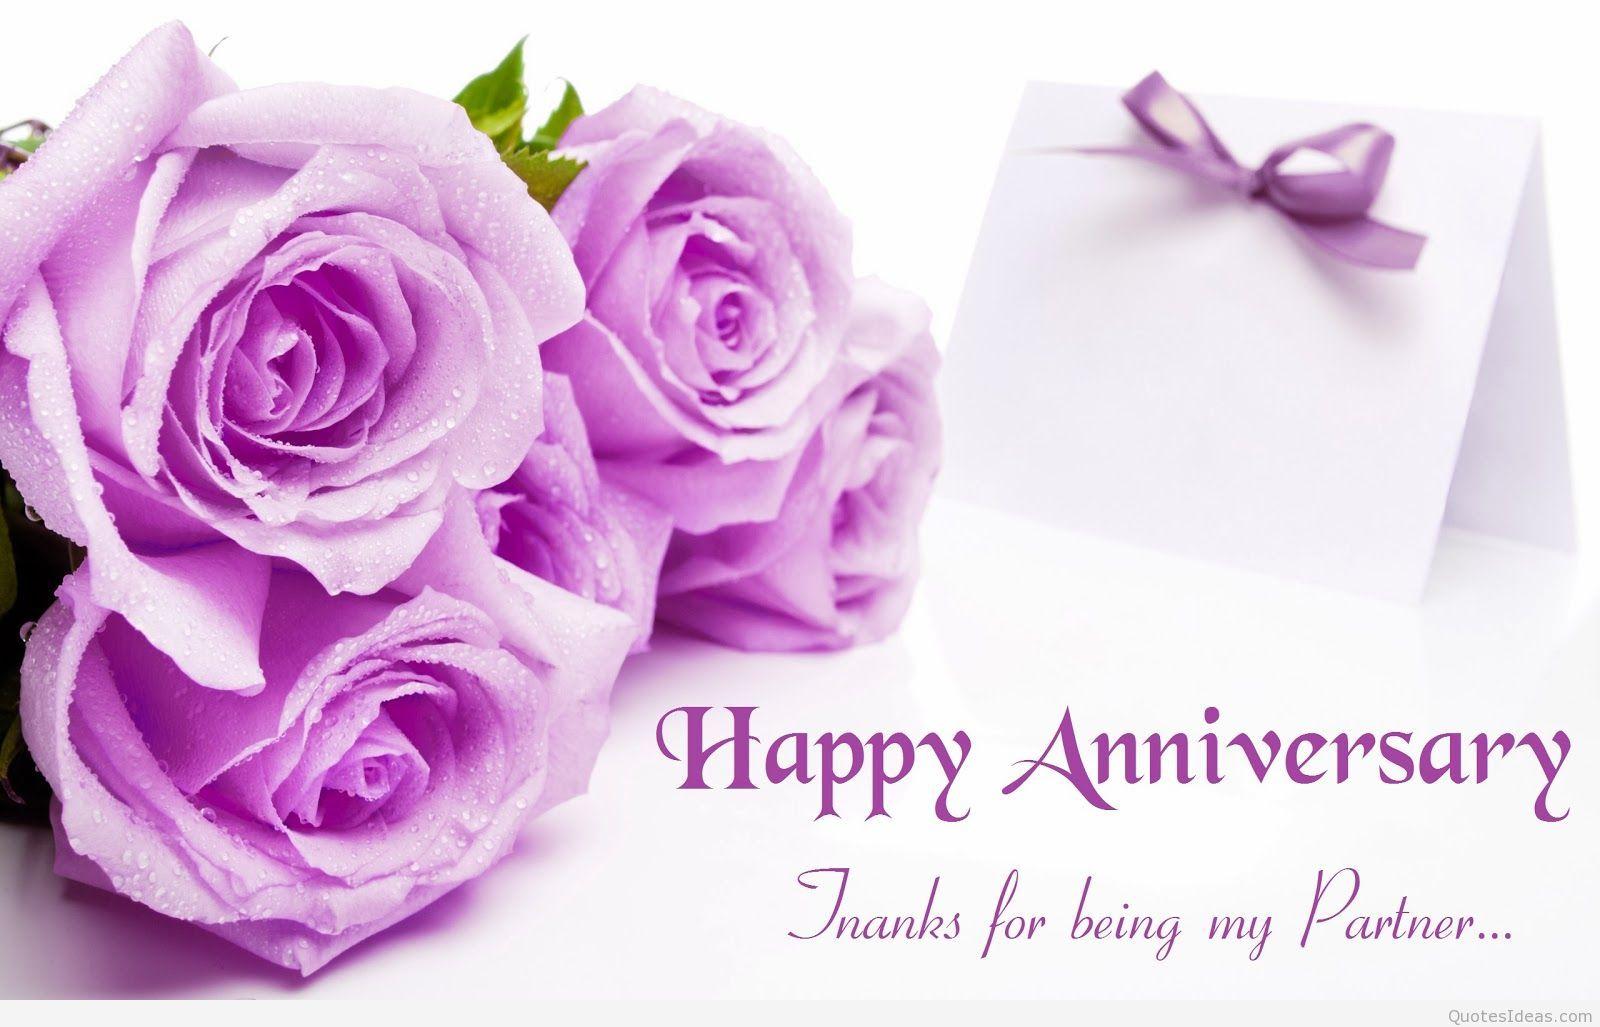 Happy anniversary wishes, quotes, messages on wallpaper